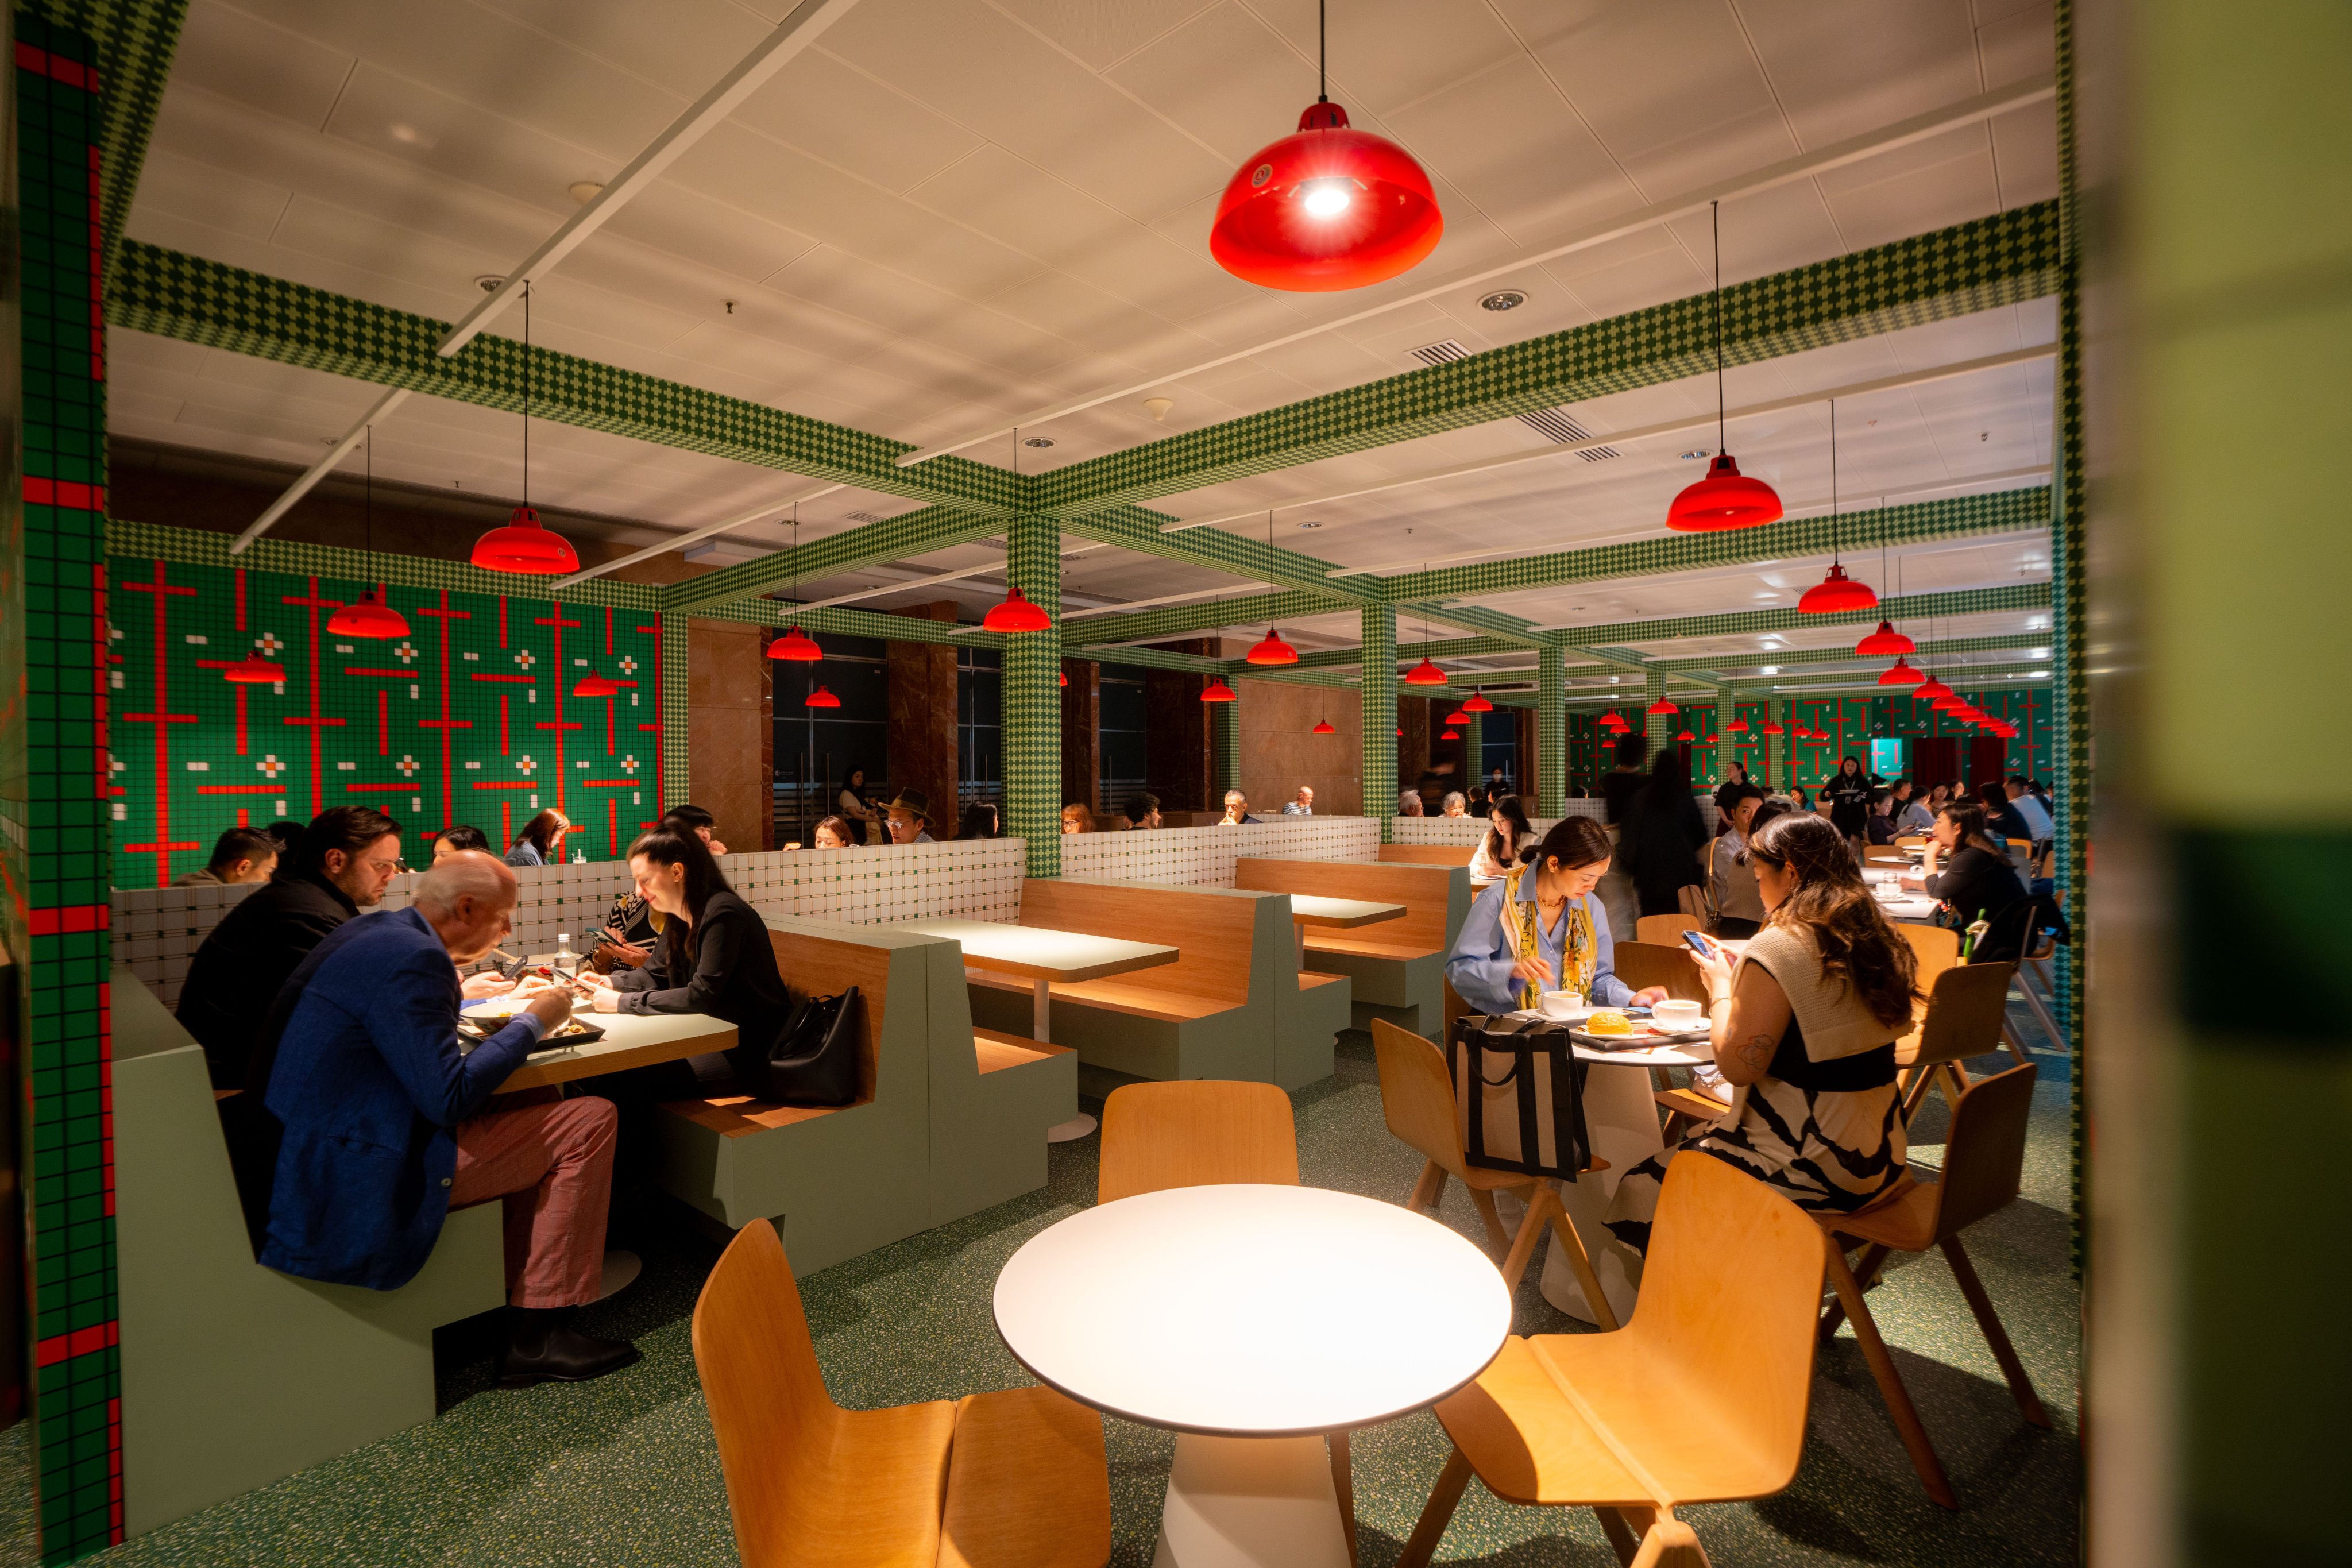 The Tourism Board’s creation of a cha chaan teng exhibit for Art Basel Hong Kong in March inspired the new three-year partnership. Photo: HKTB